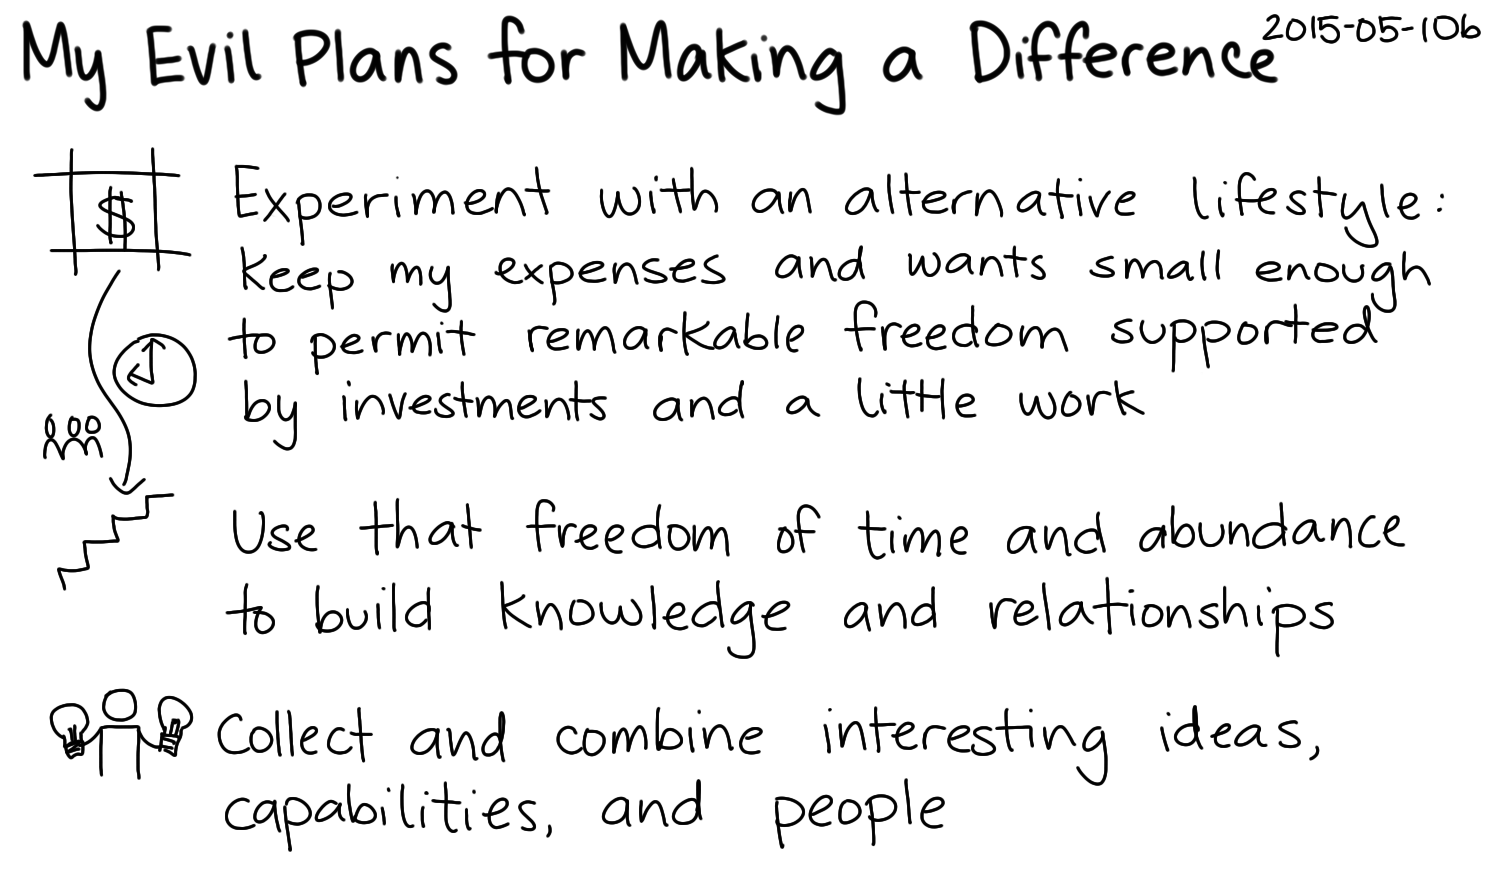 2015-05-10b My Evil Plans for making a difference -- index card #plans #experiment #evil-plans.png